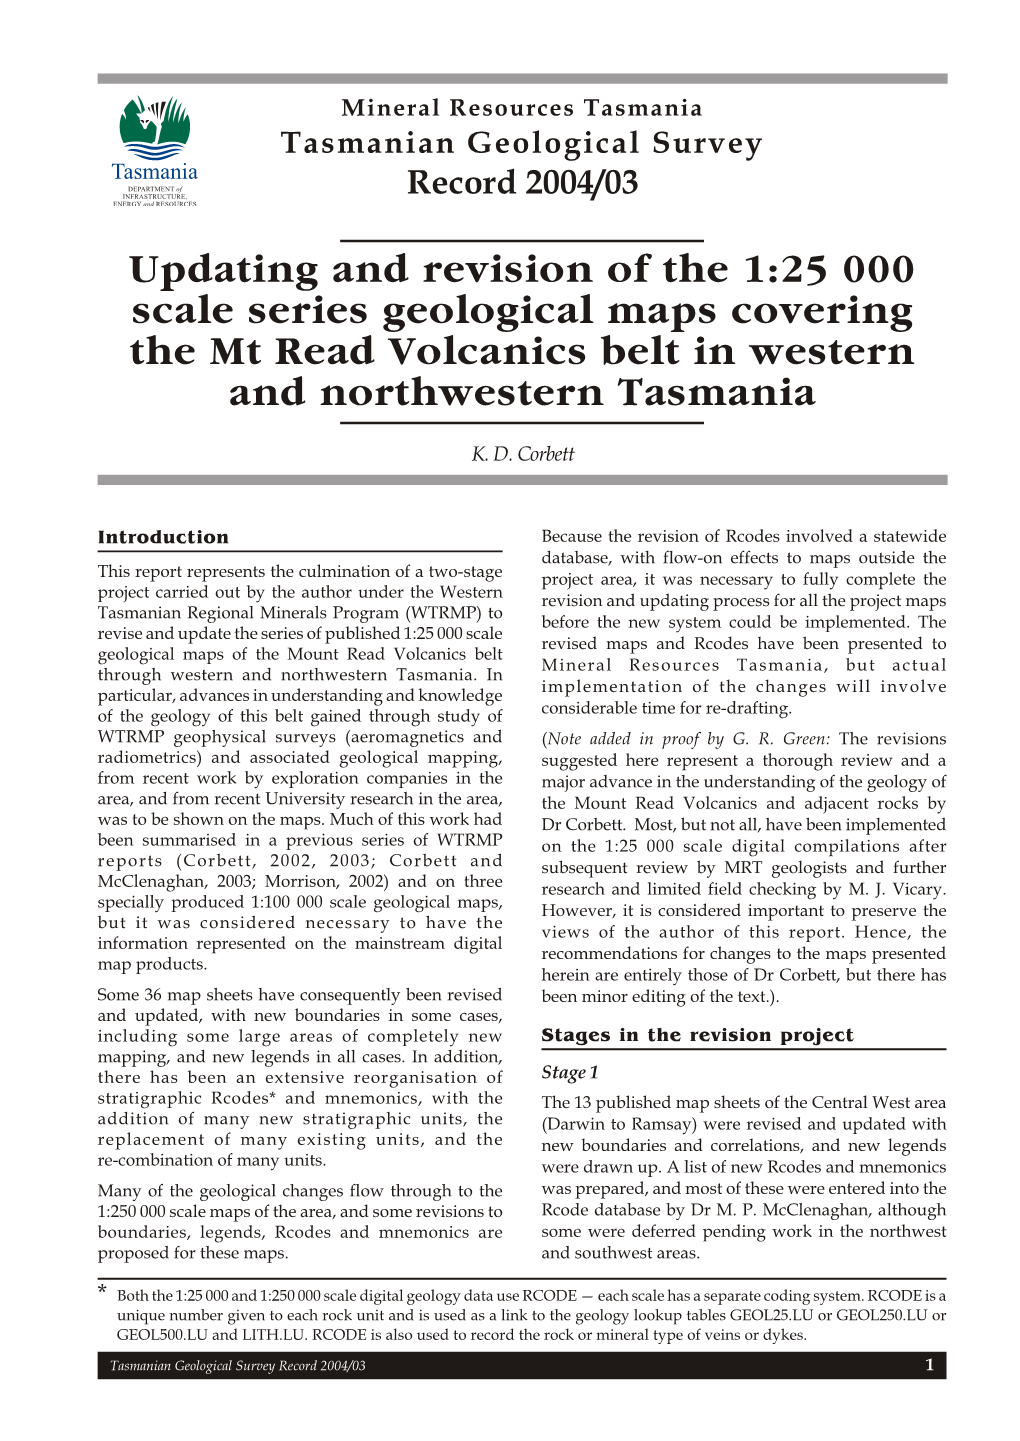 Updating and Revision of the 1:25 000 Scale Series Geological Maps Covering the Mt Read Volcanics Belt in Western and Northwestern Tasmania